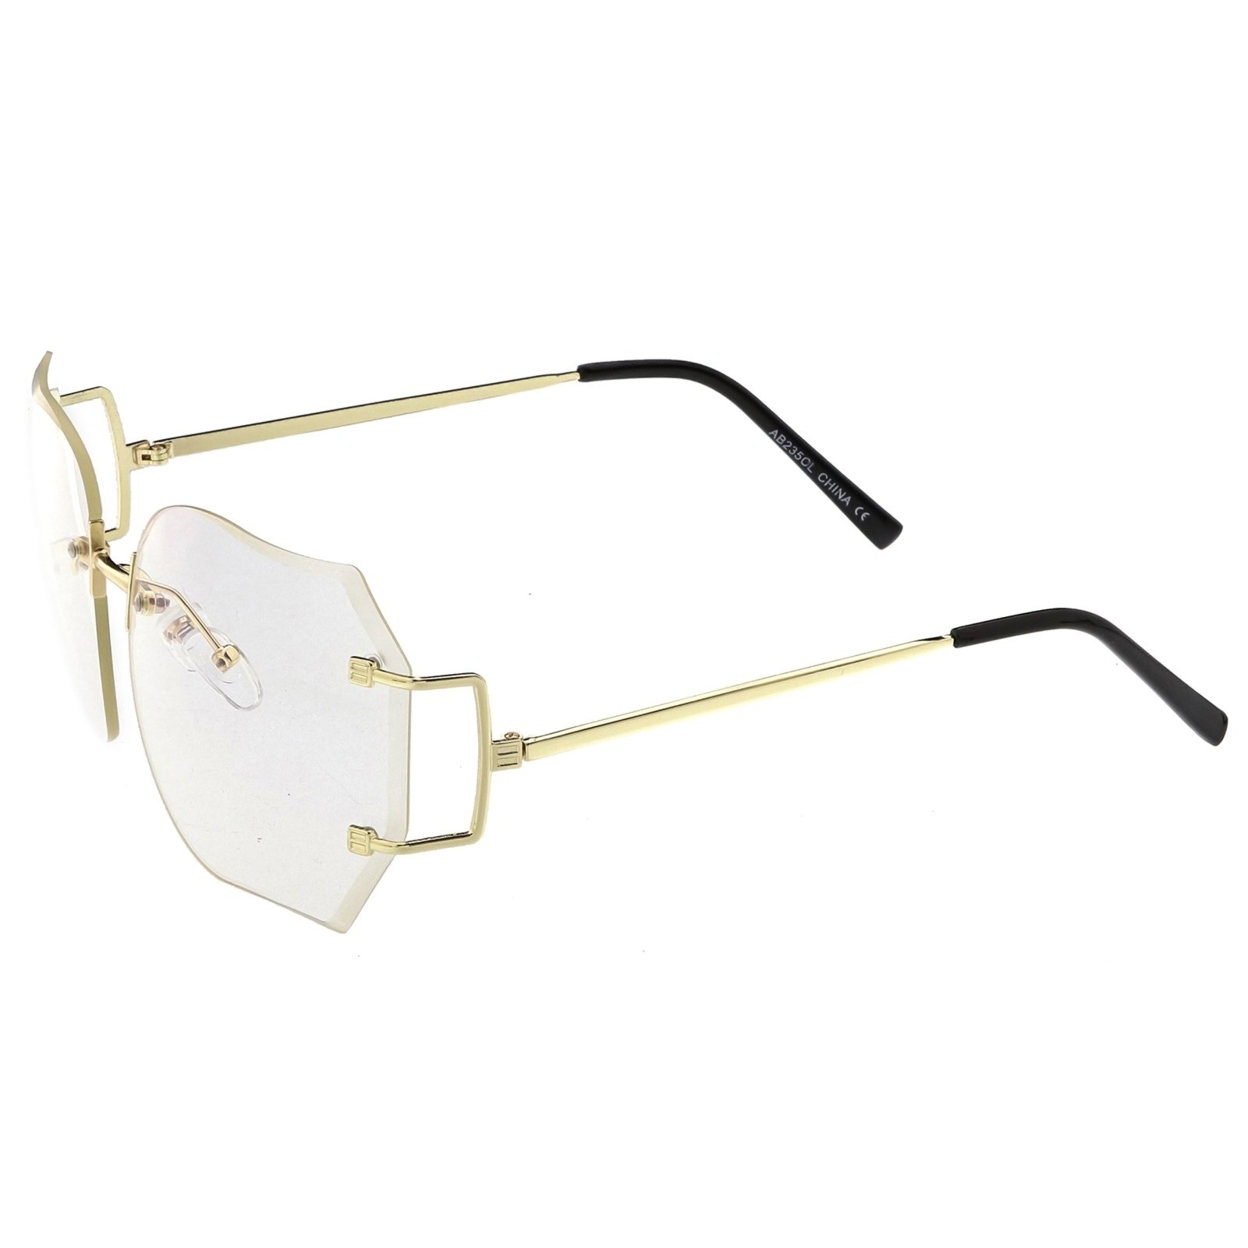 Oversize Rimless Square Glasses Slim Metal Rams Beveled Clear Lens 61mm - Gold / Clear Tint